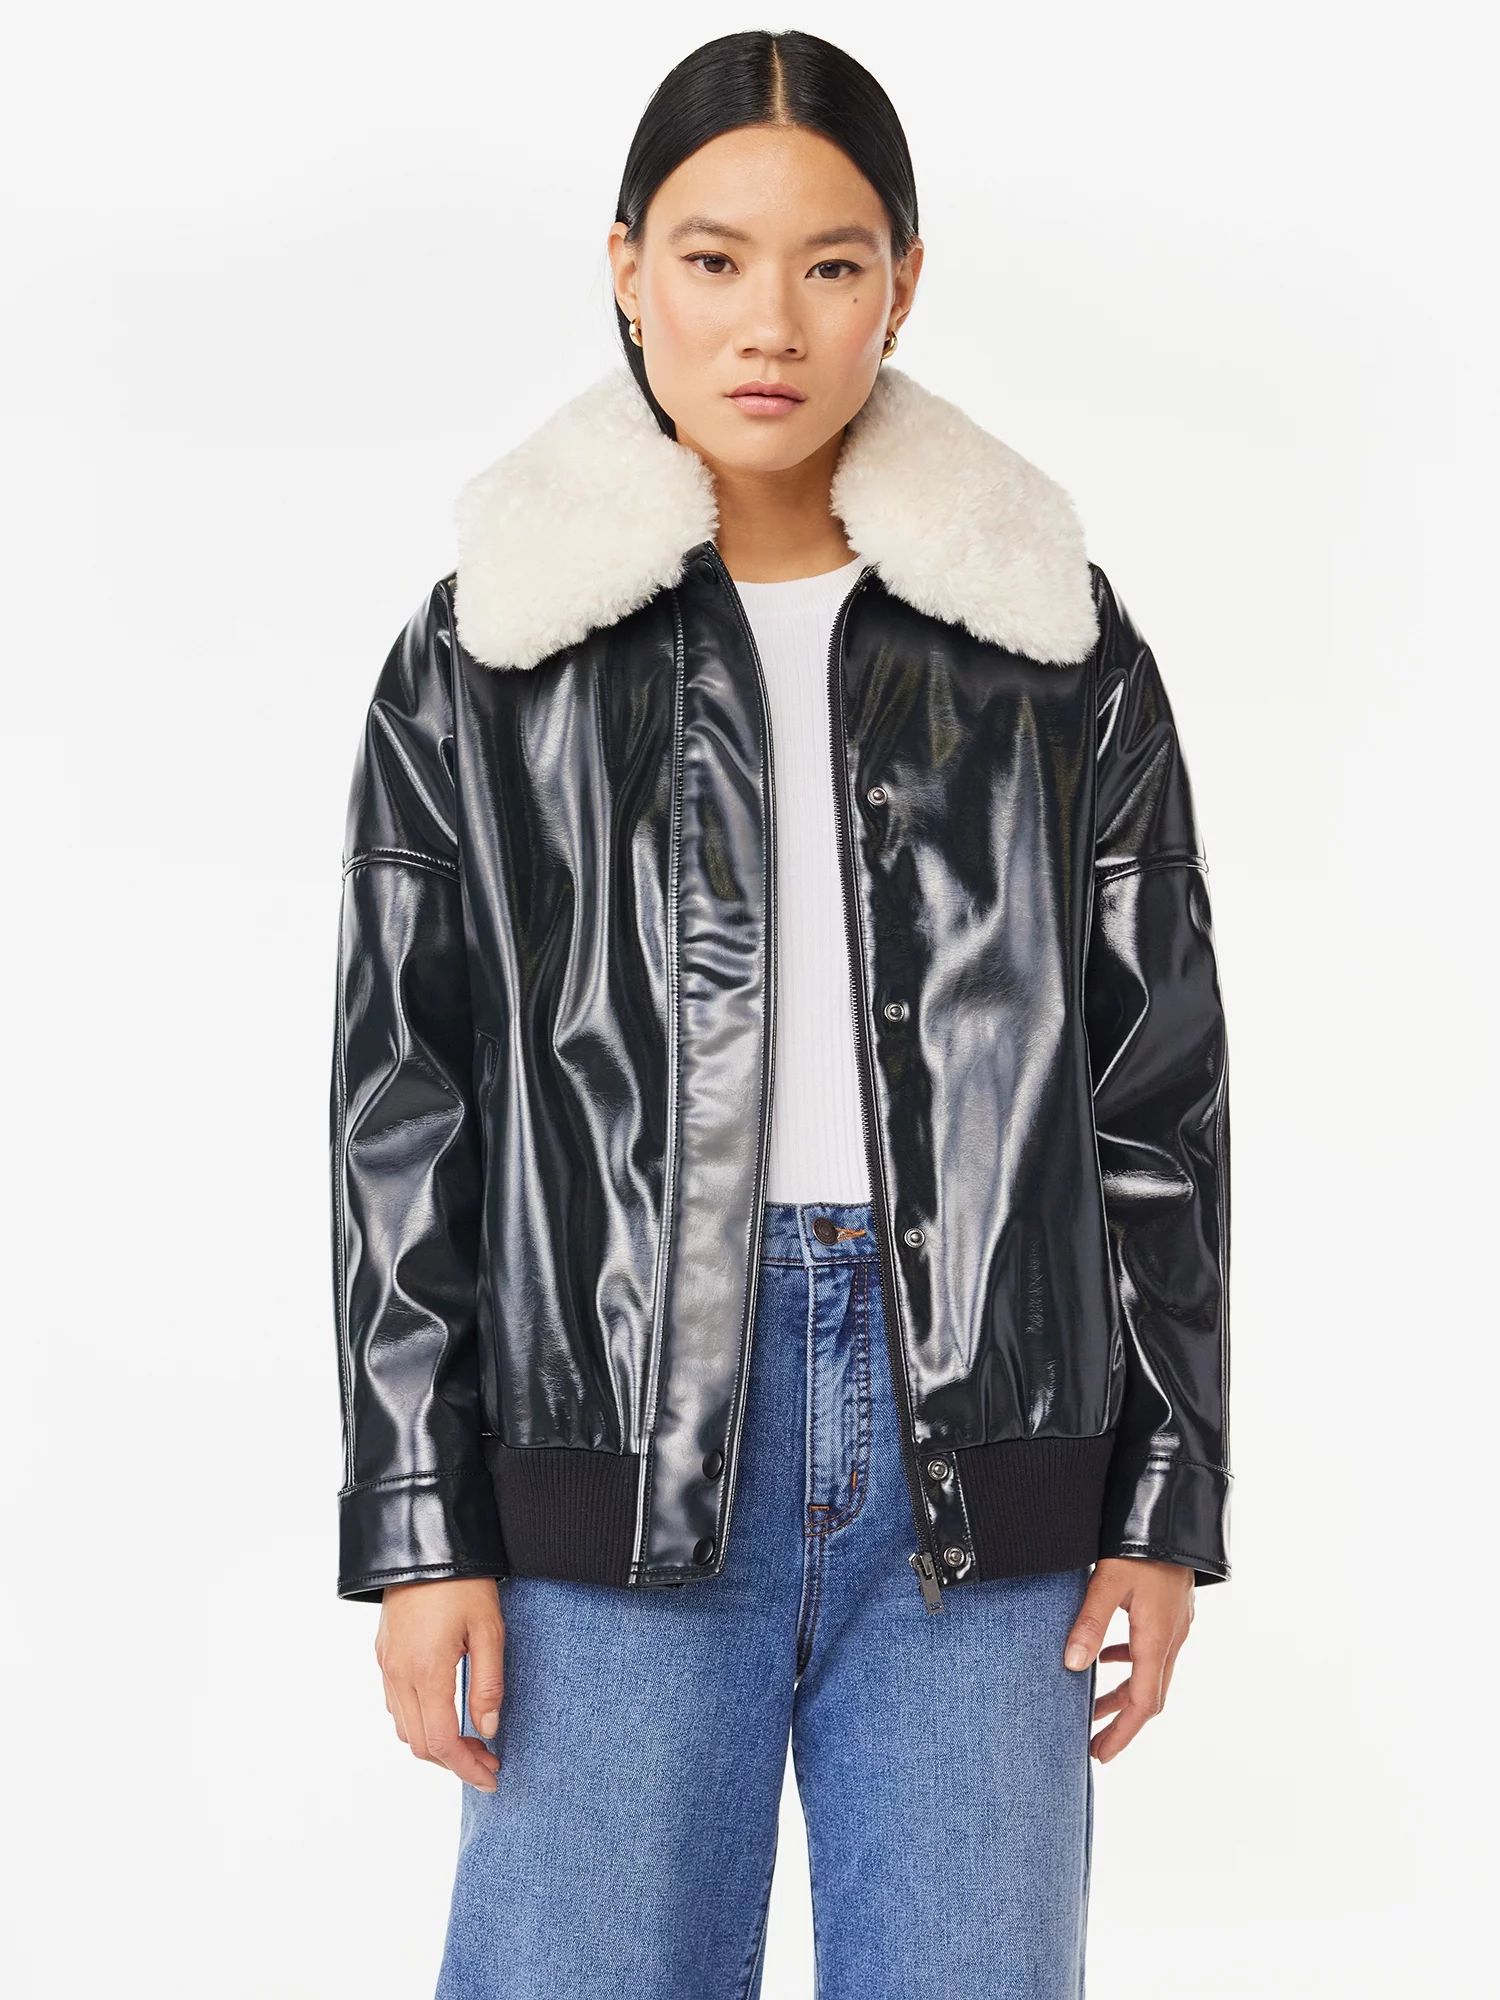 Scoop Women's Oversized Faux Leather Jacket with Faux Fur Collar, Sizes XS-2XL | Walmart (US)